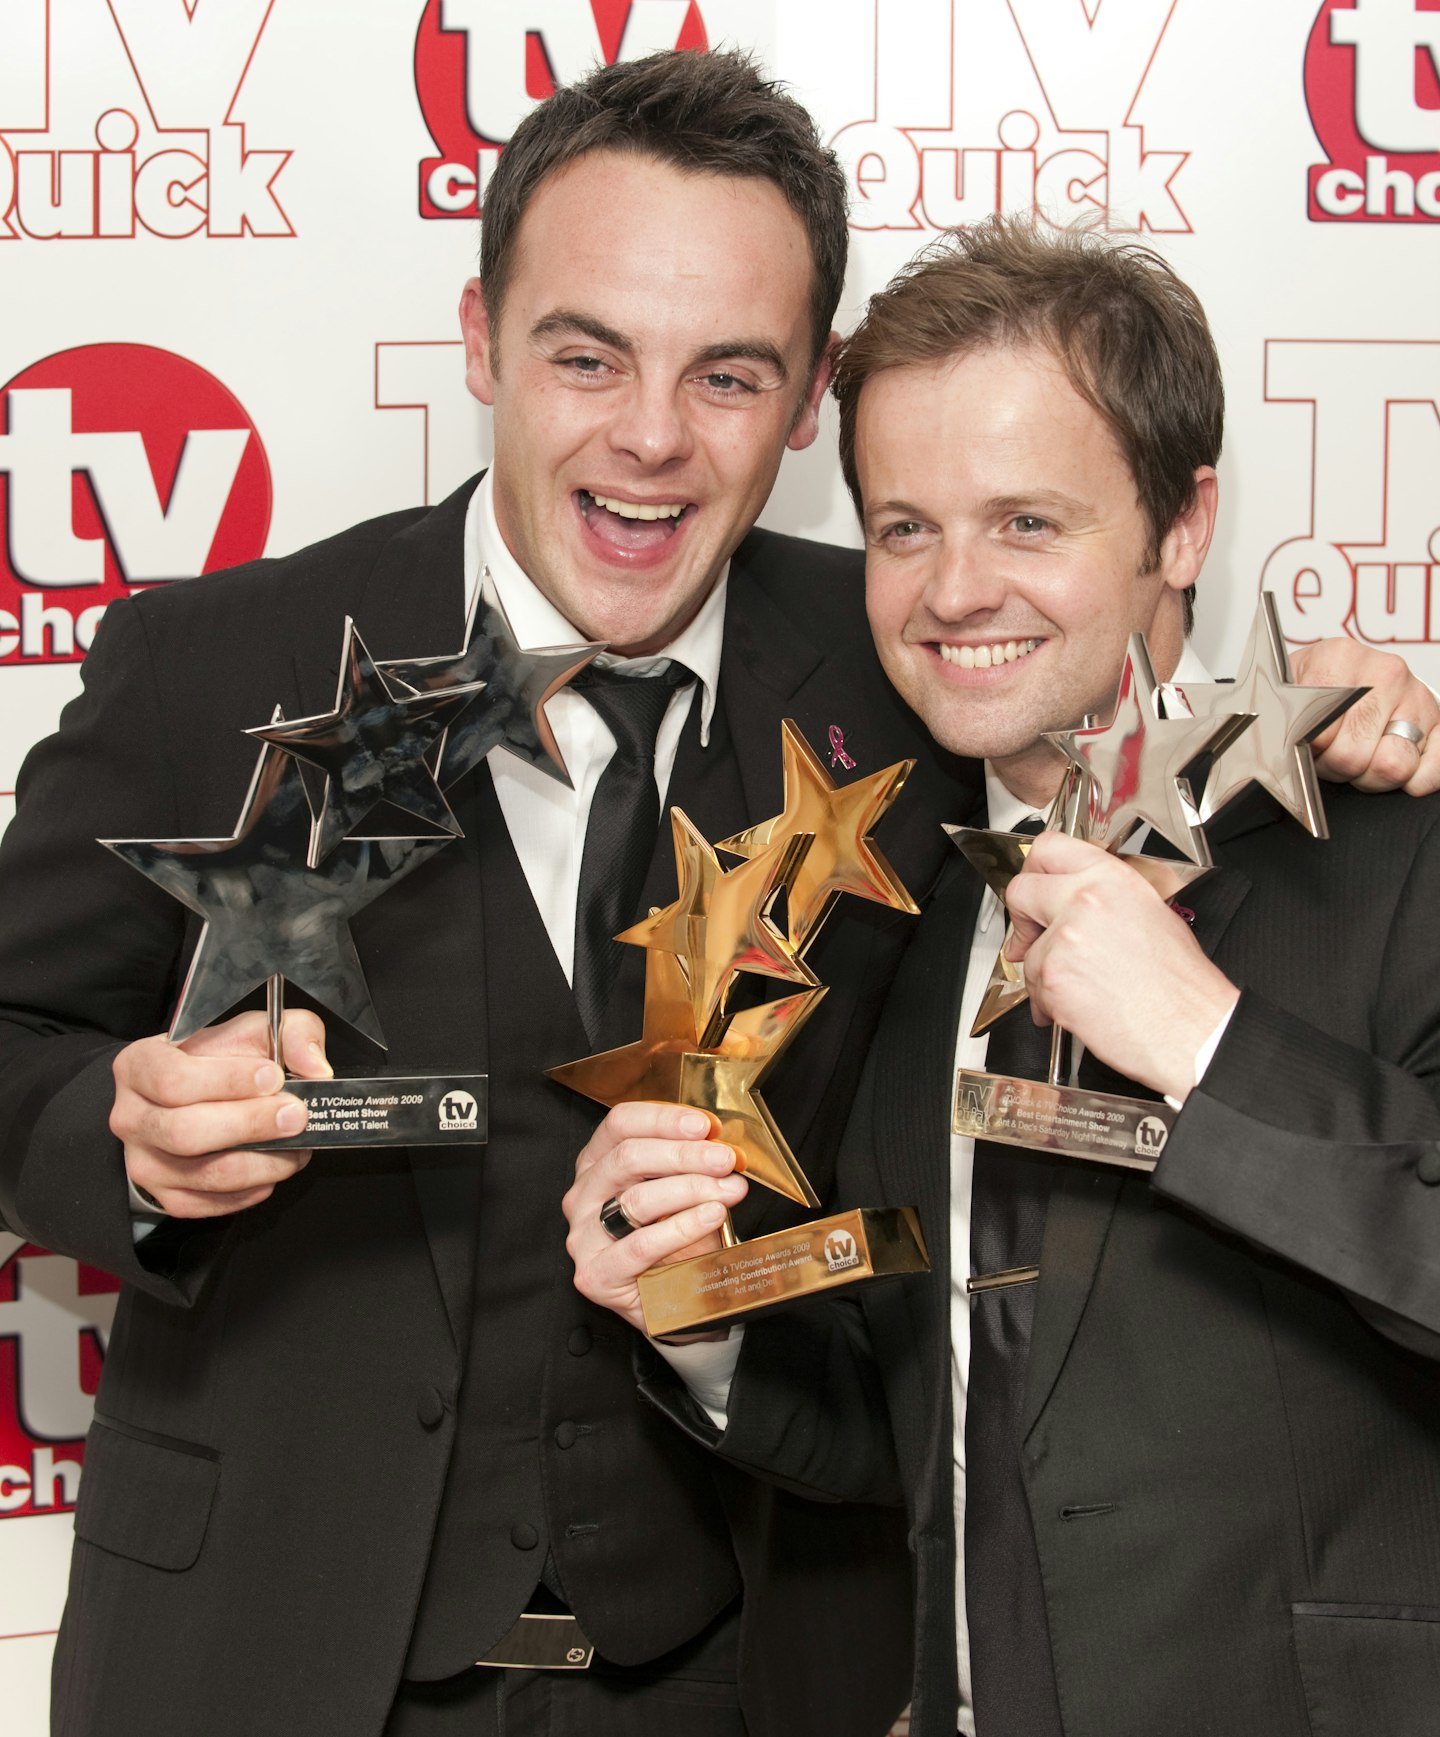 Ant McPartlin and Dec Donnelly